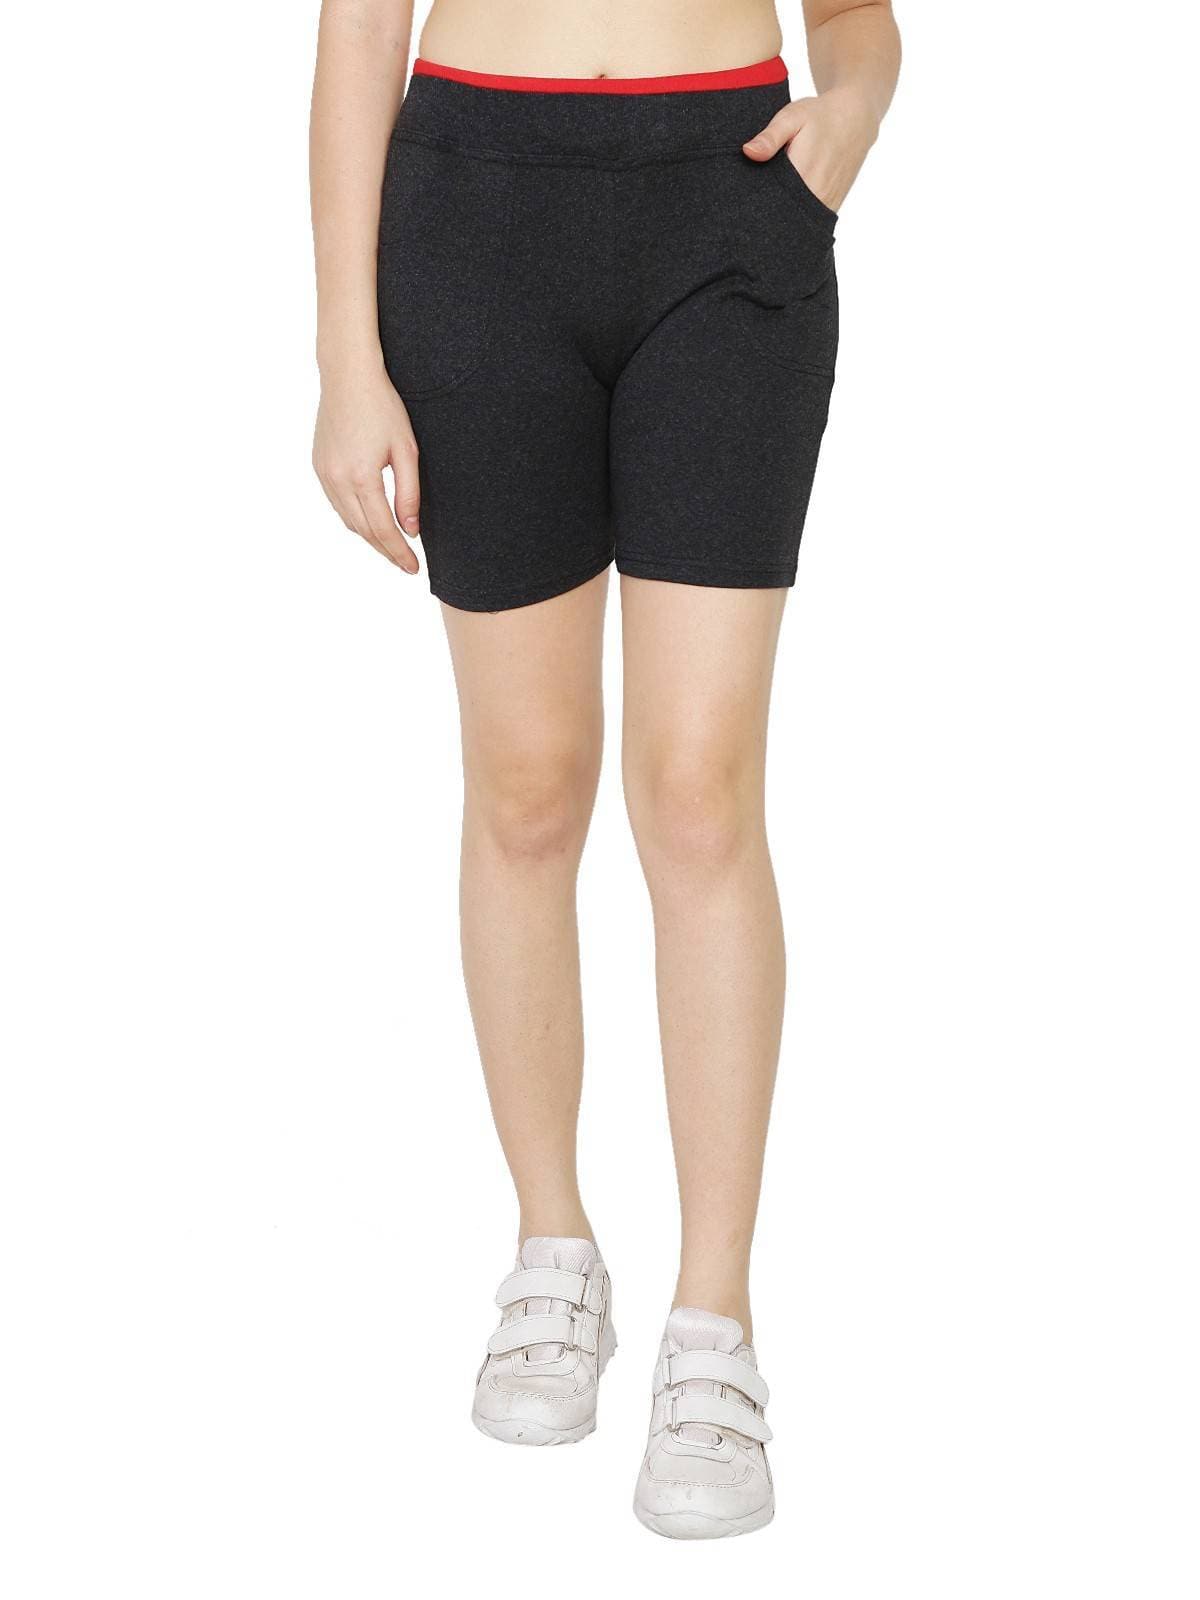 Asmaani Dark Grey Color Short Pant with Two Side Pockets